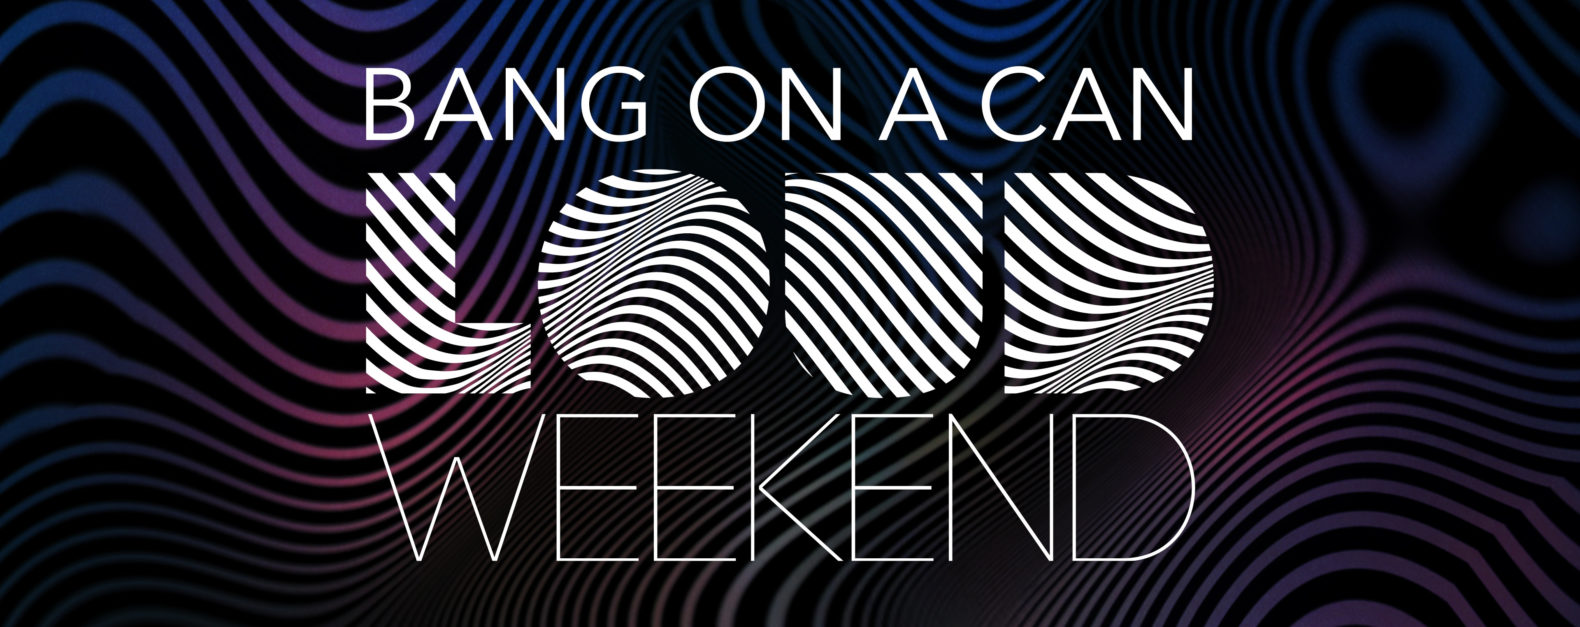 Bang on a Feature image, Bang on a Can Loud Weekend text overlaying wavy purple, white, and black lines